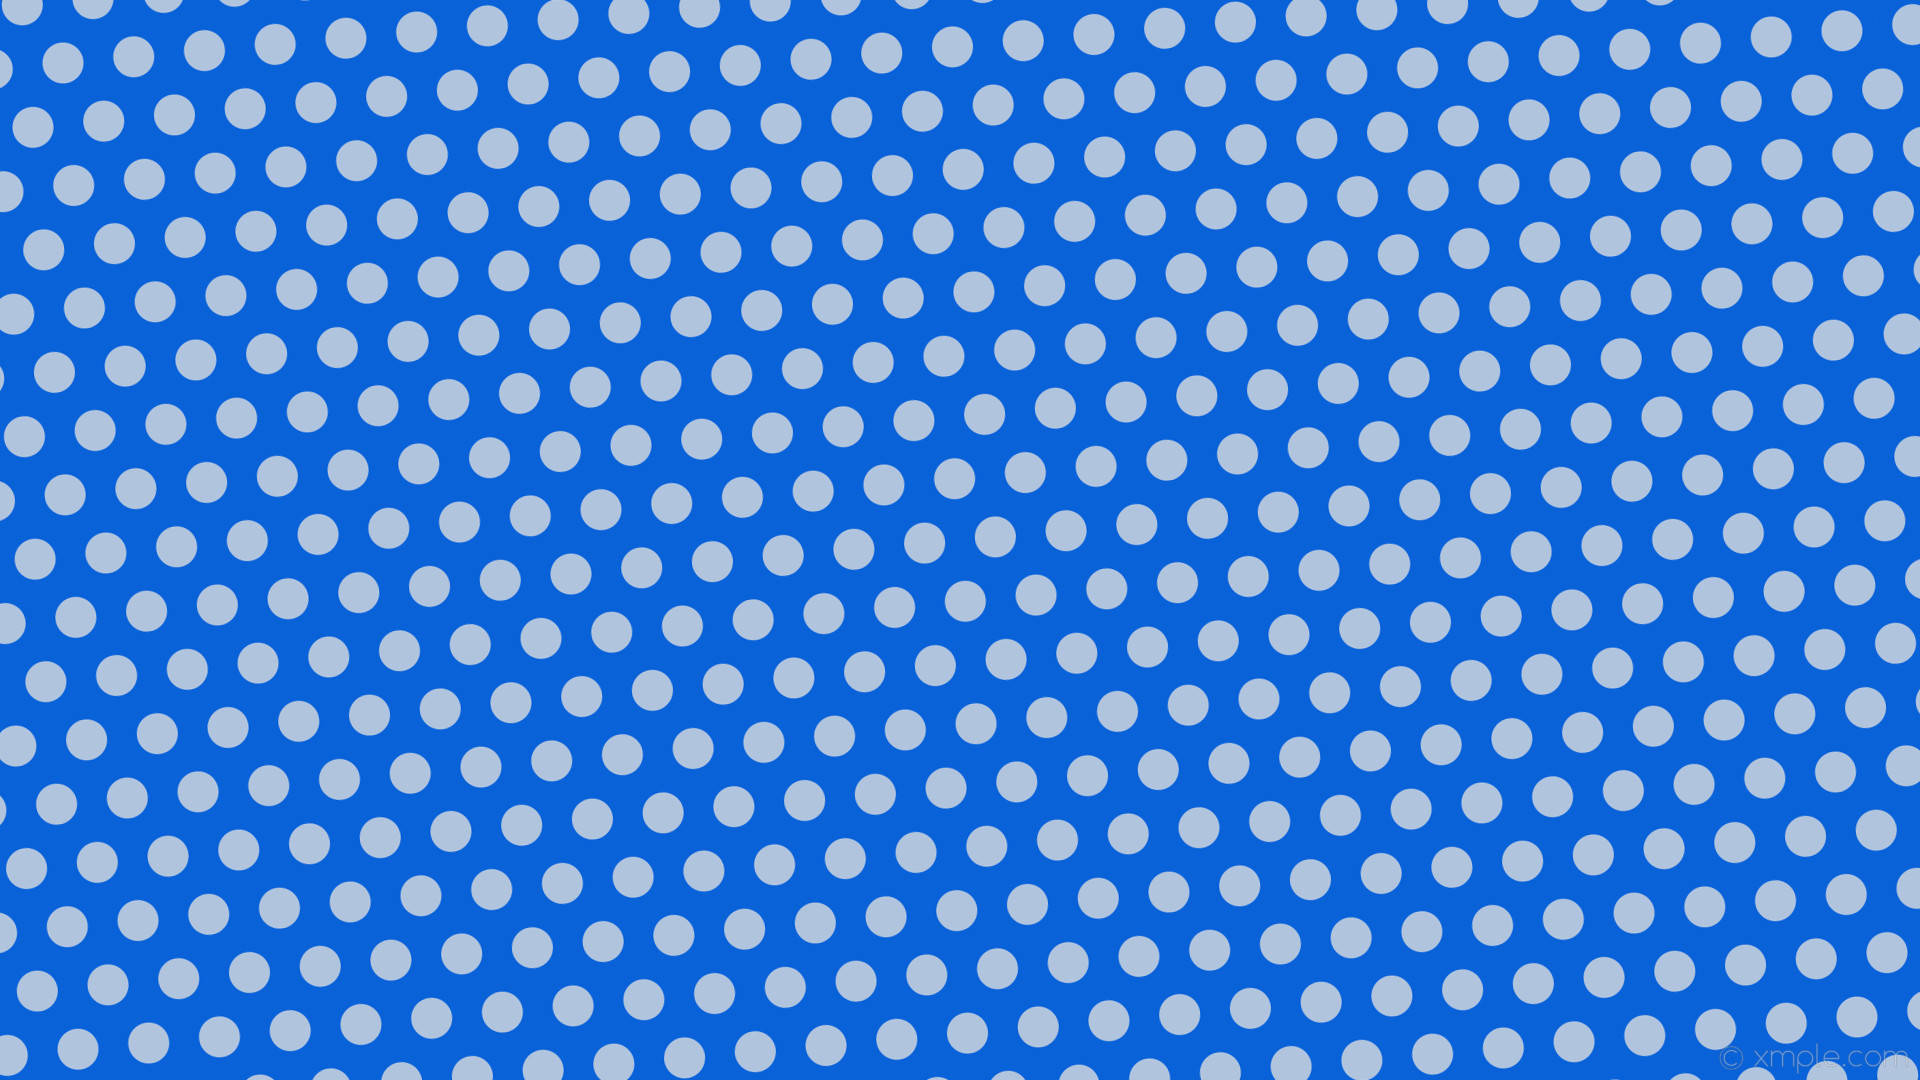 Azure Blue With Gray Polka Dots Wallpaper